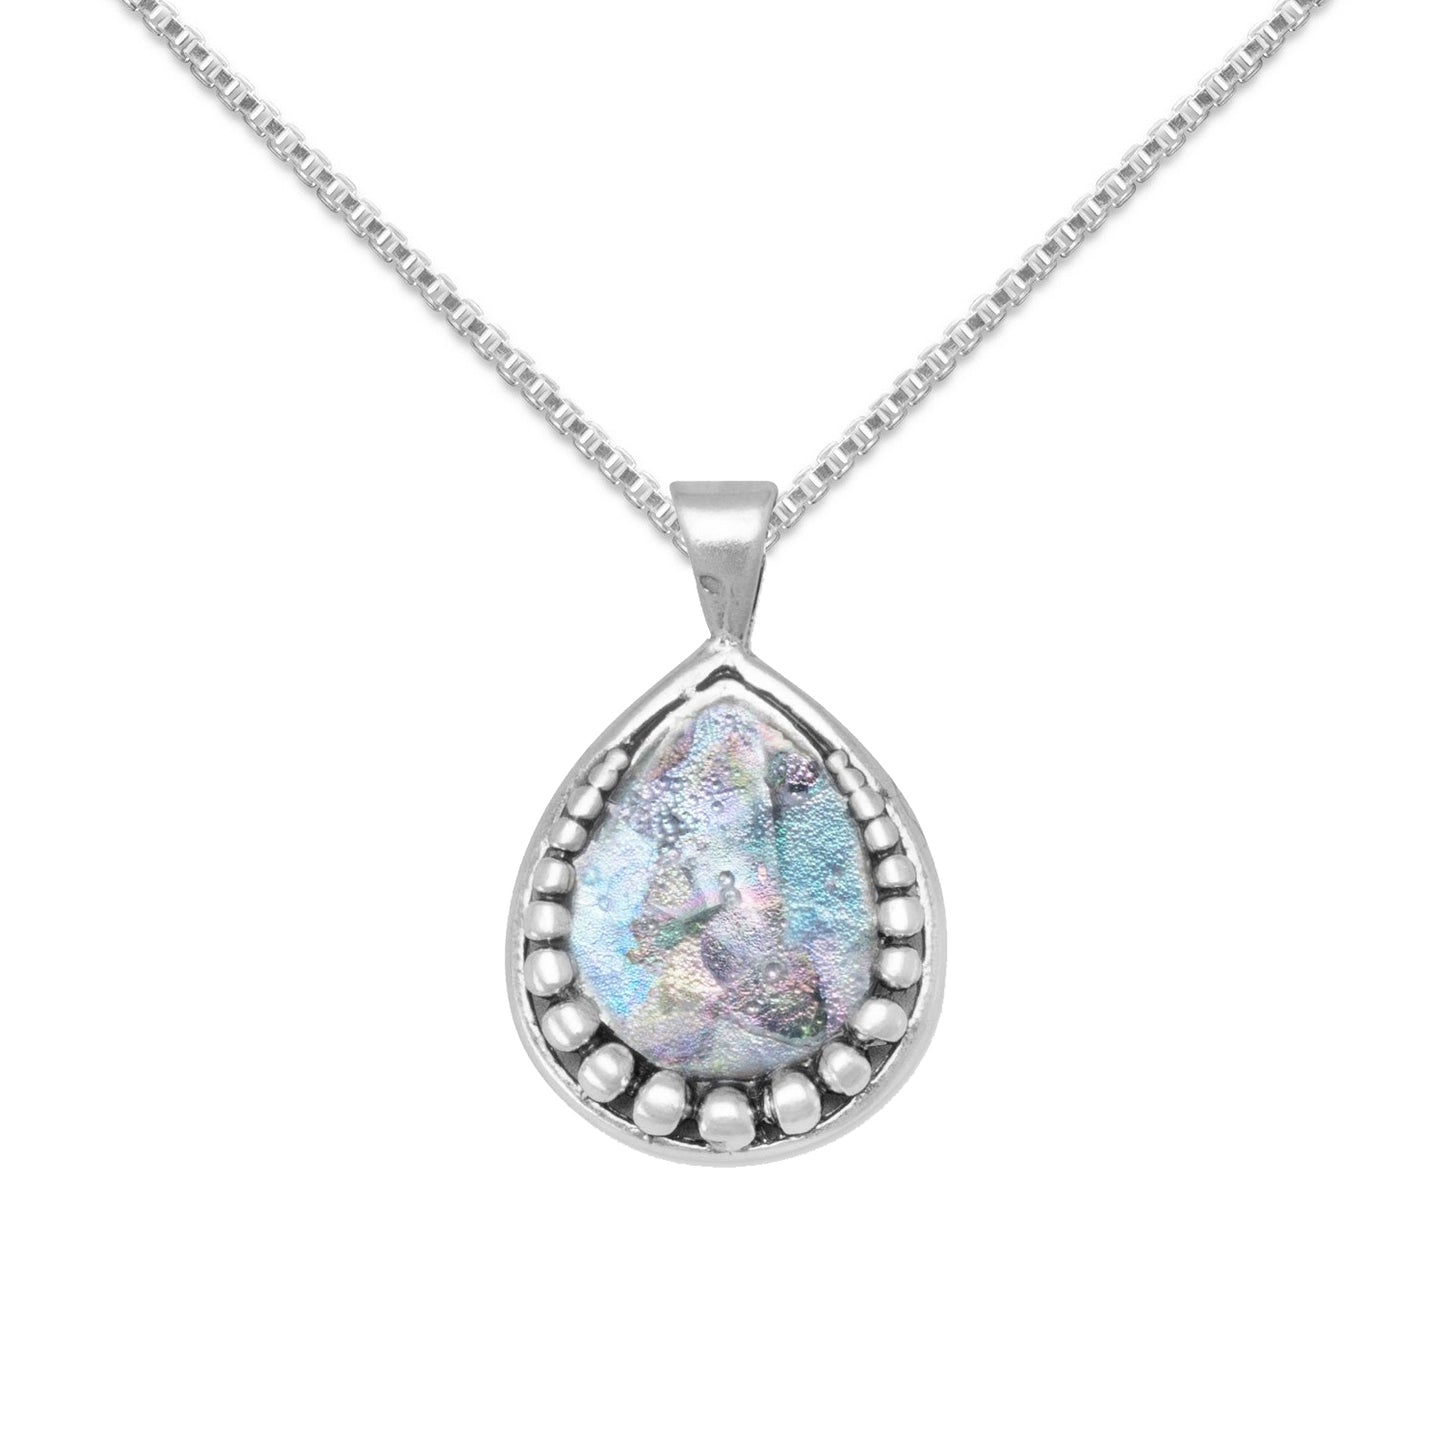 Precious Stars Jewelry Sterling Silver Pear Shape Roman Glass Pendant with 1.5mm Box Chain